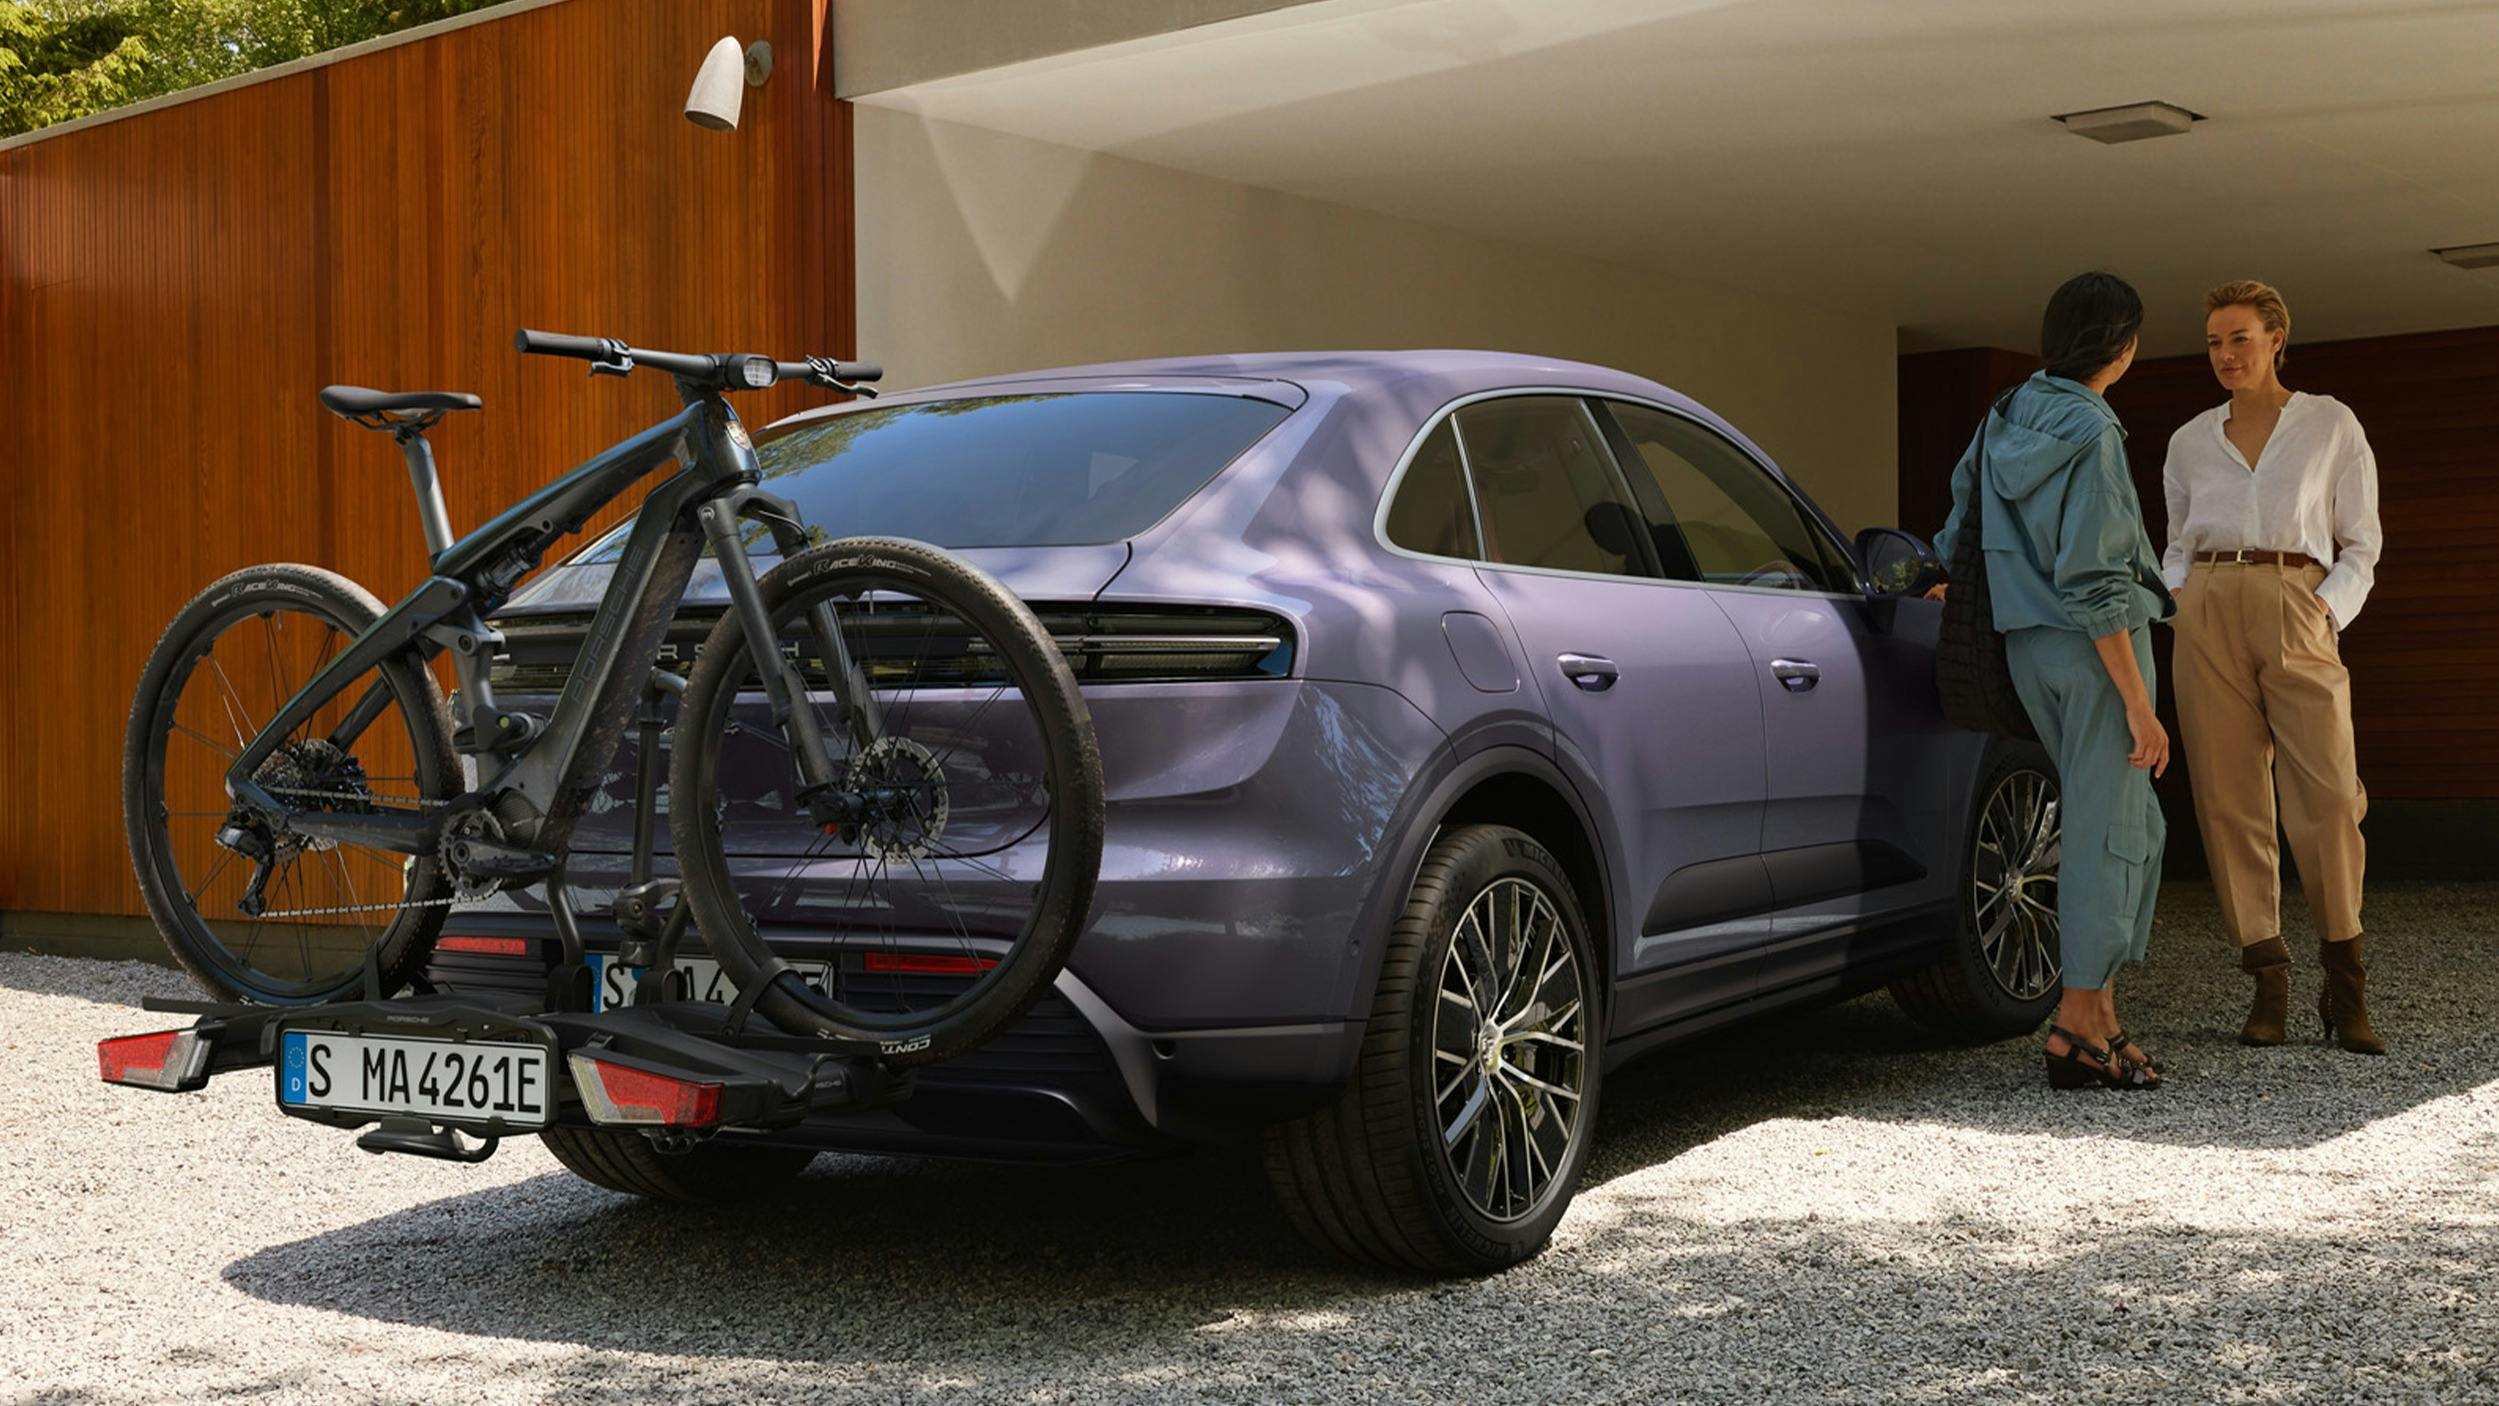 Two women chatting, standing next to a Provence coloured electric Macan with a Porsche eBike on a bike rack attached to the back.